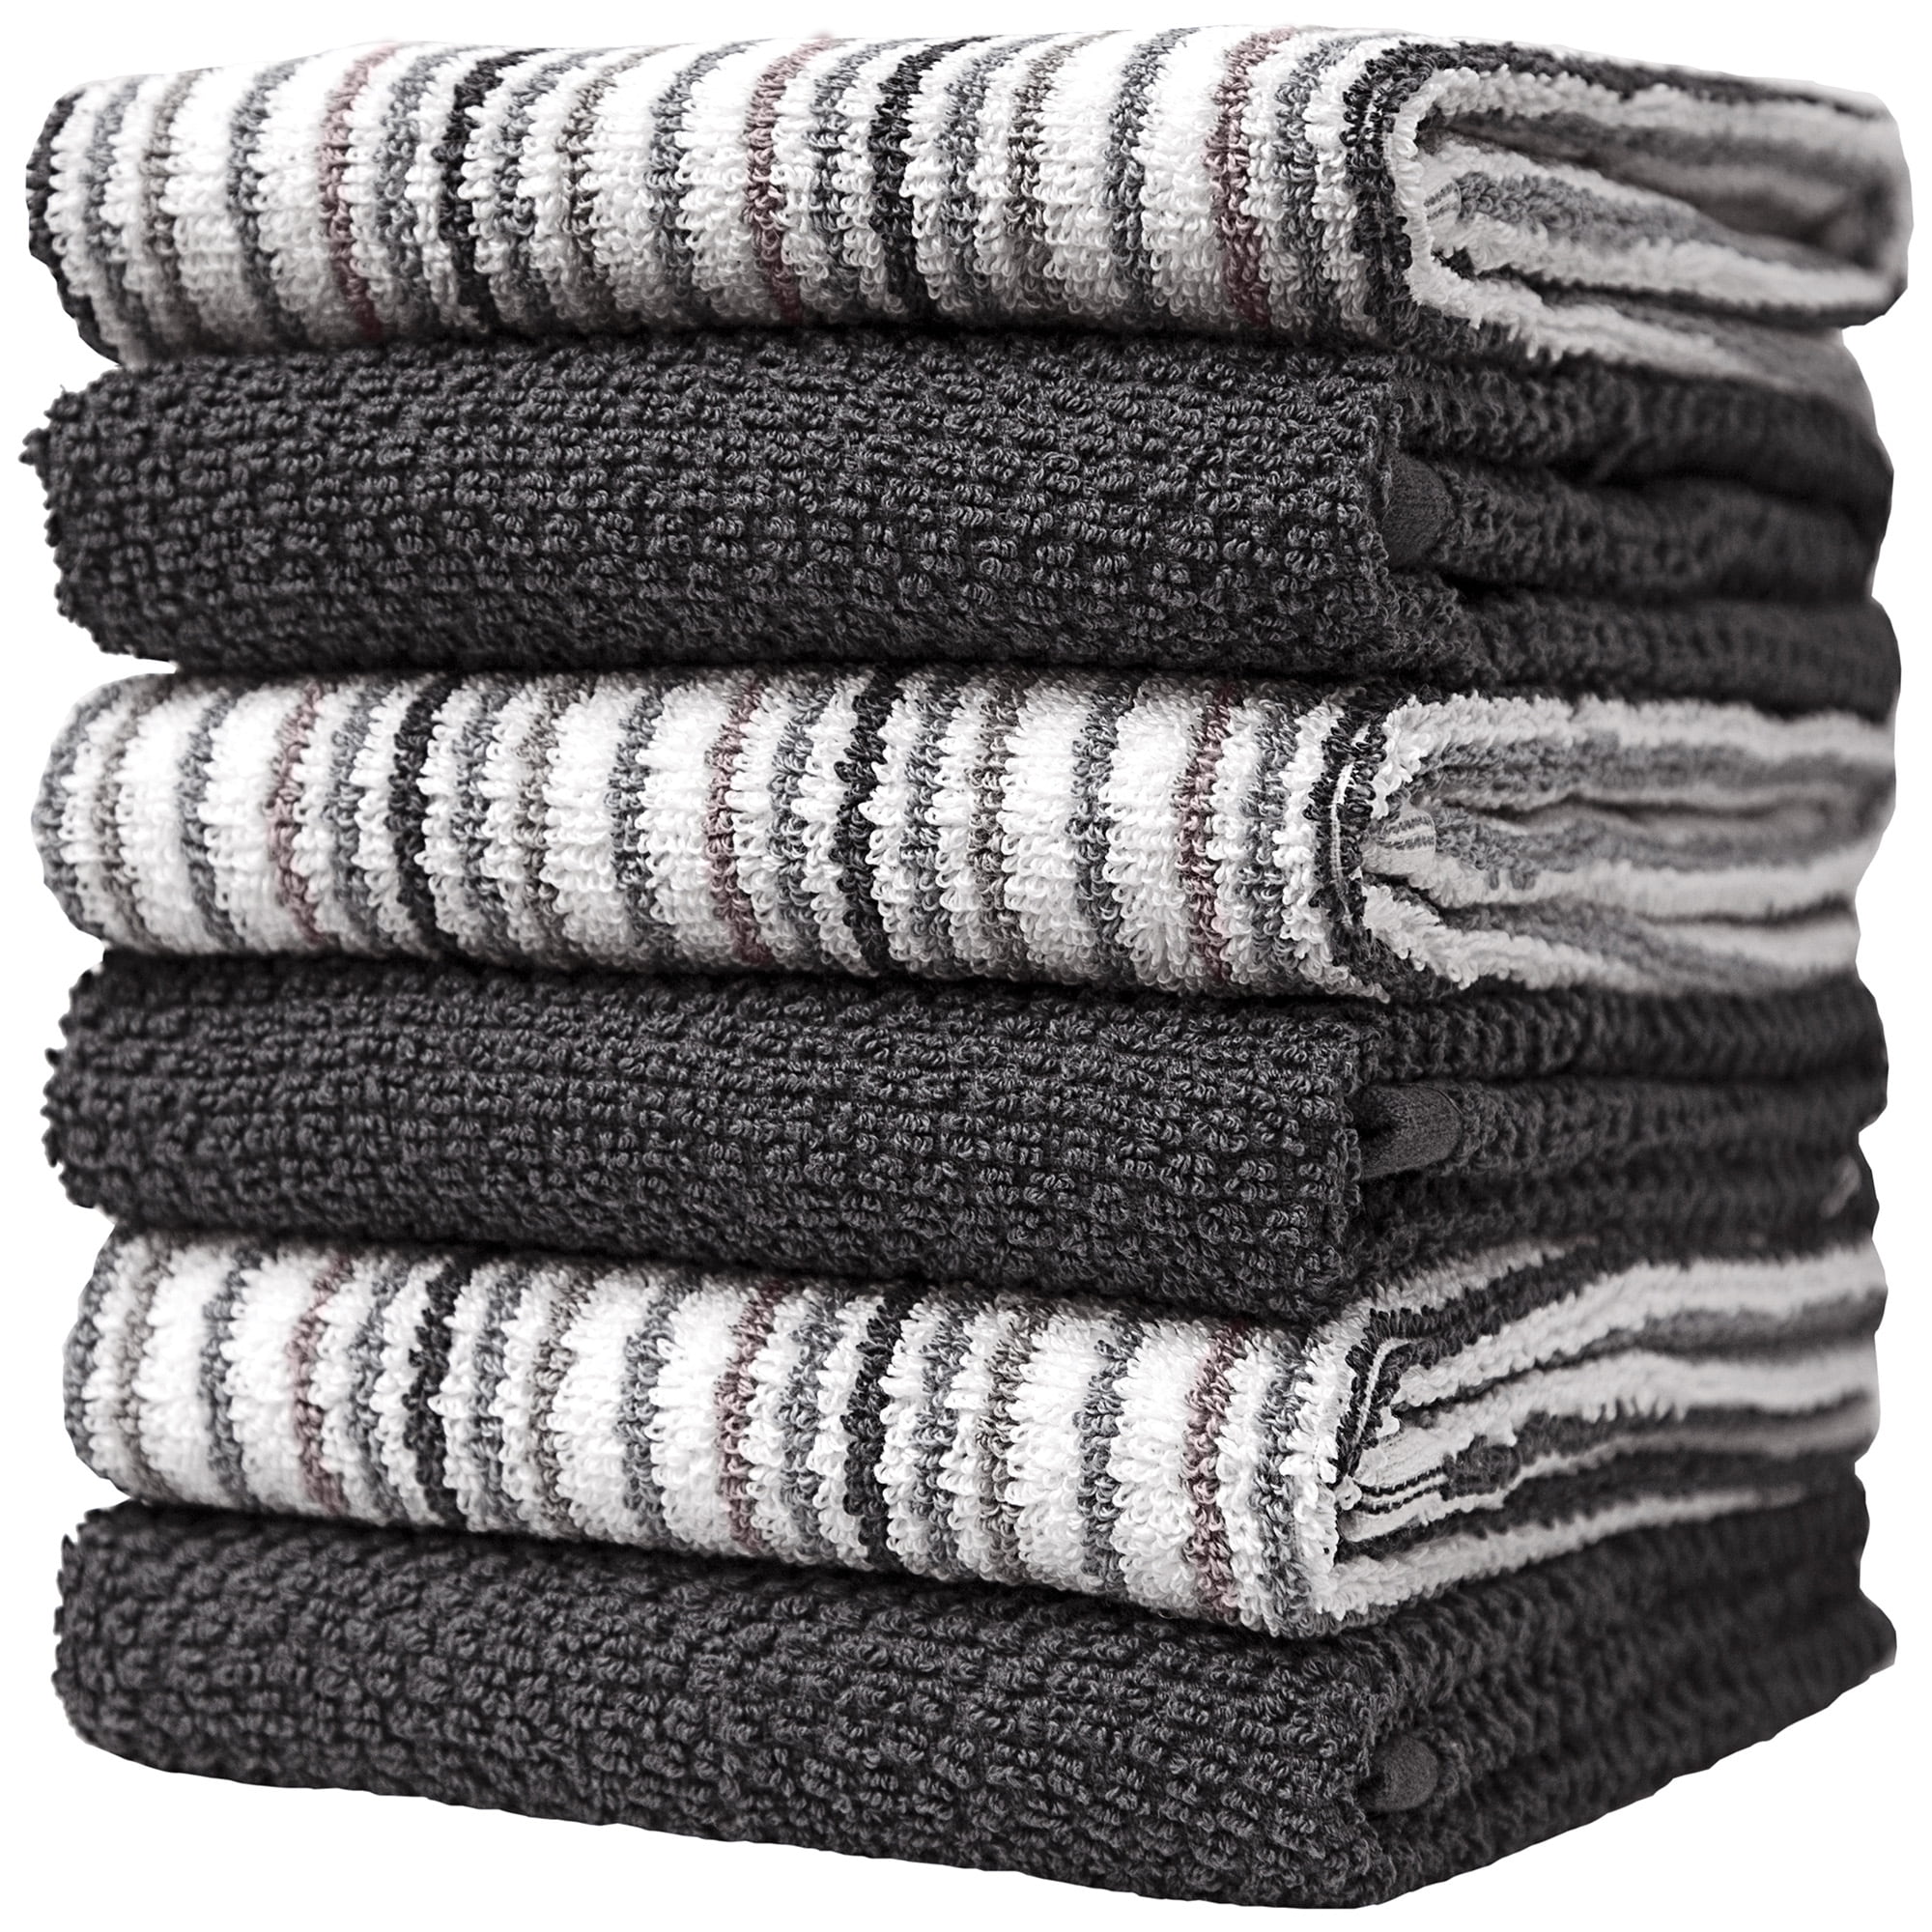 Black White Set of 4 Kitchen Dish Towels 20X30 Inch Extra Large Size Highly  Absorbent 100% Cotton Hand Towel with Mitered Corners Modern Stripes For